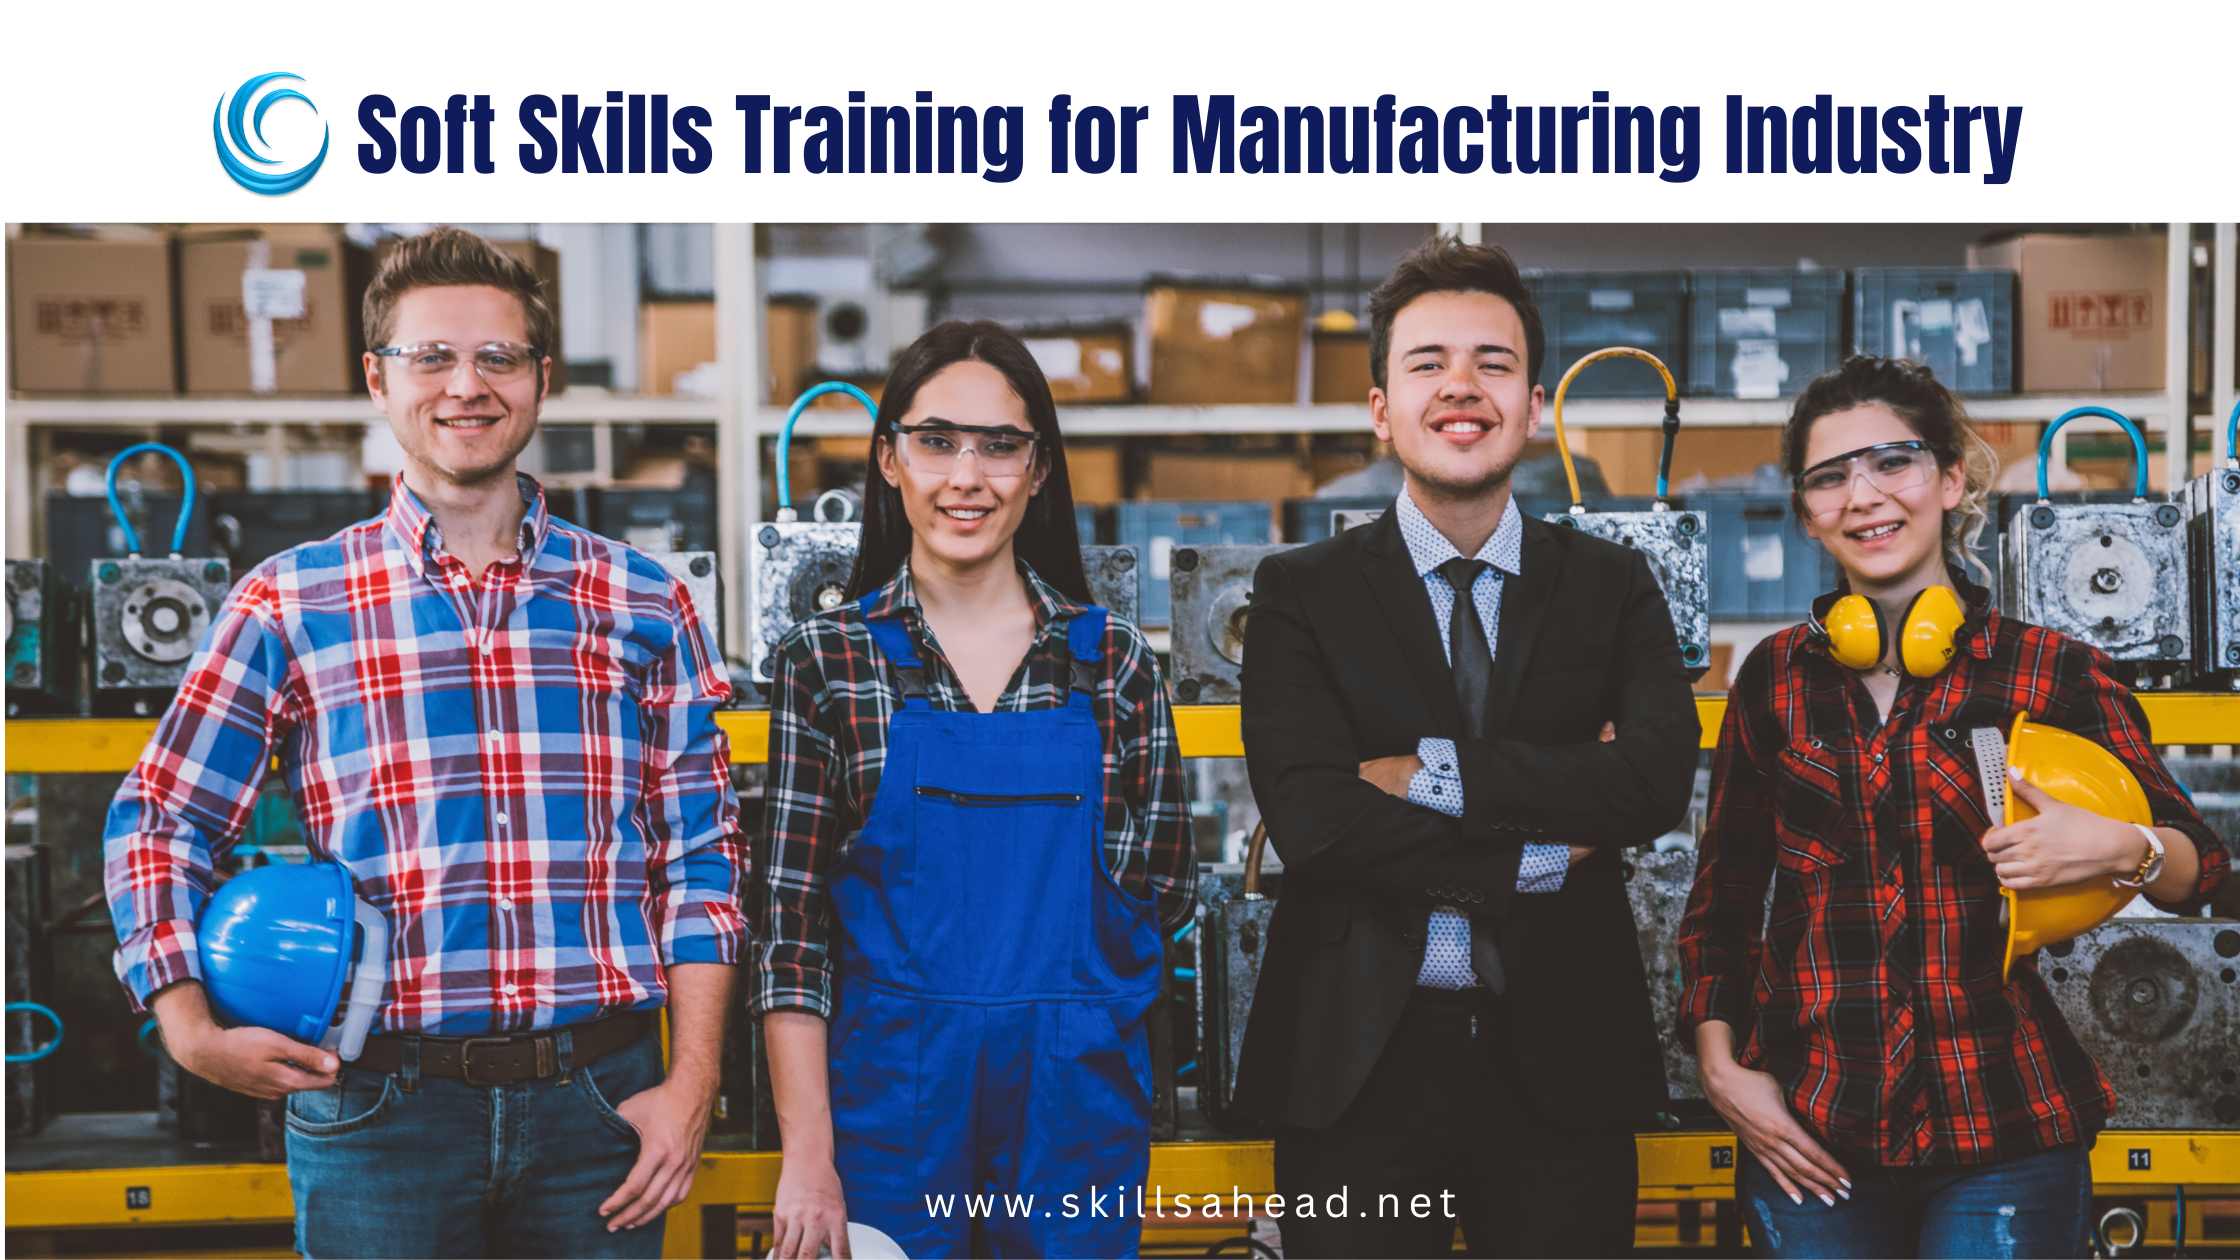 Soft Skills Training for Manufacturing Industry